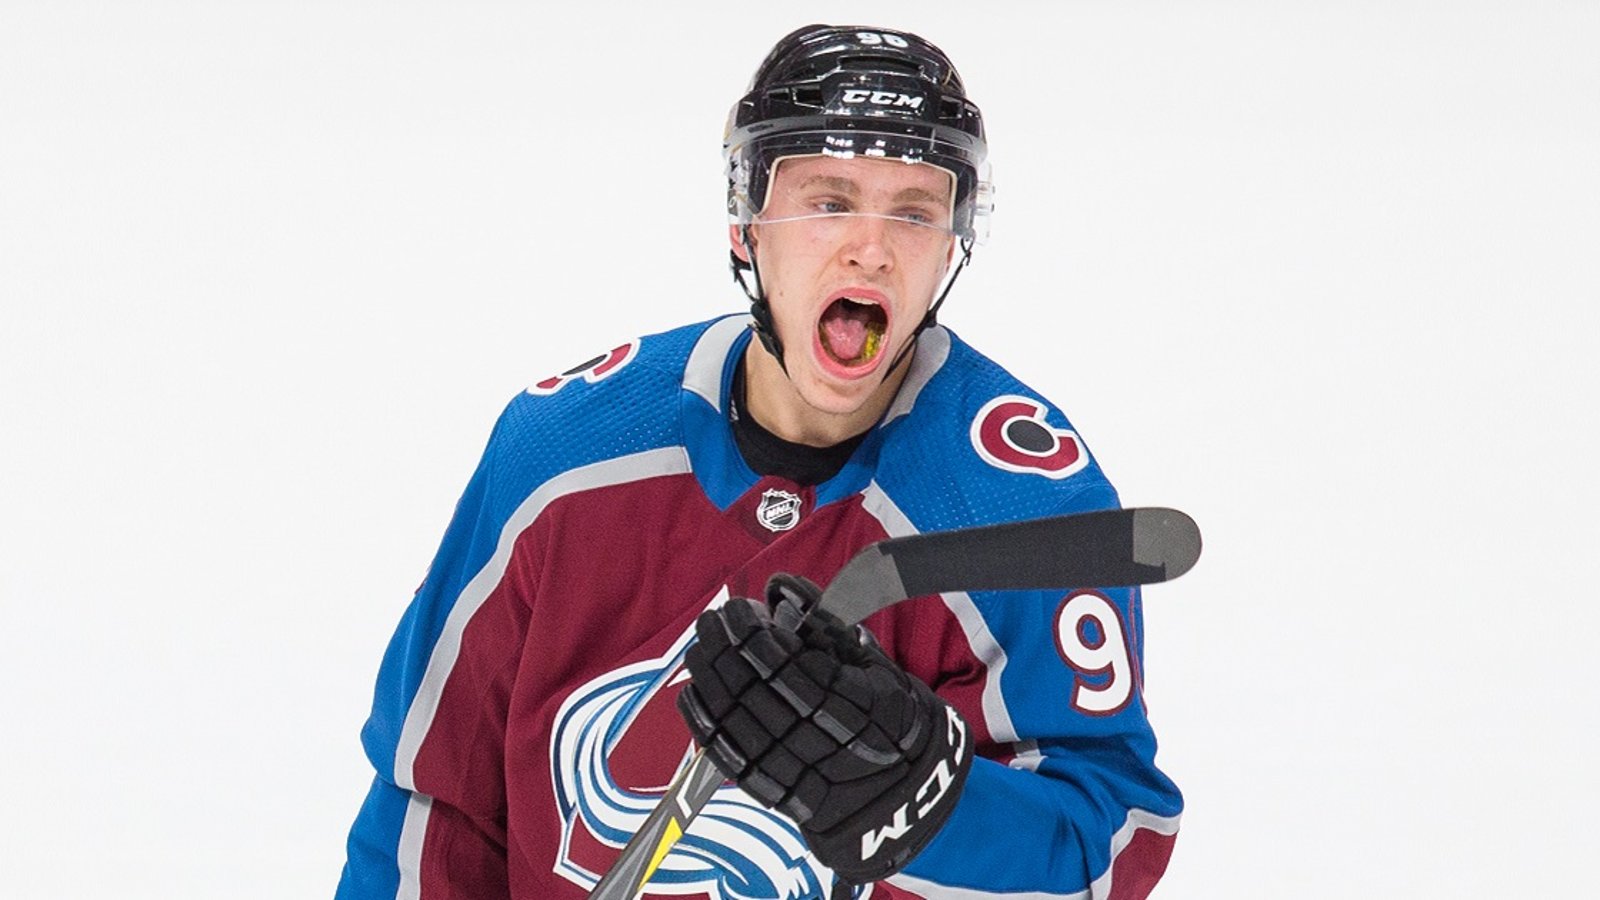 Mikko Rantanen has signed a new deal worth over $55 million!